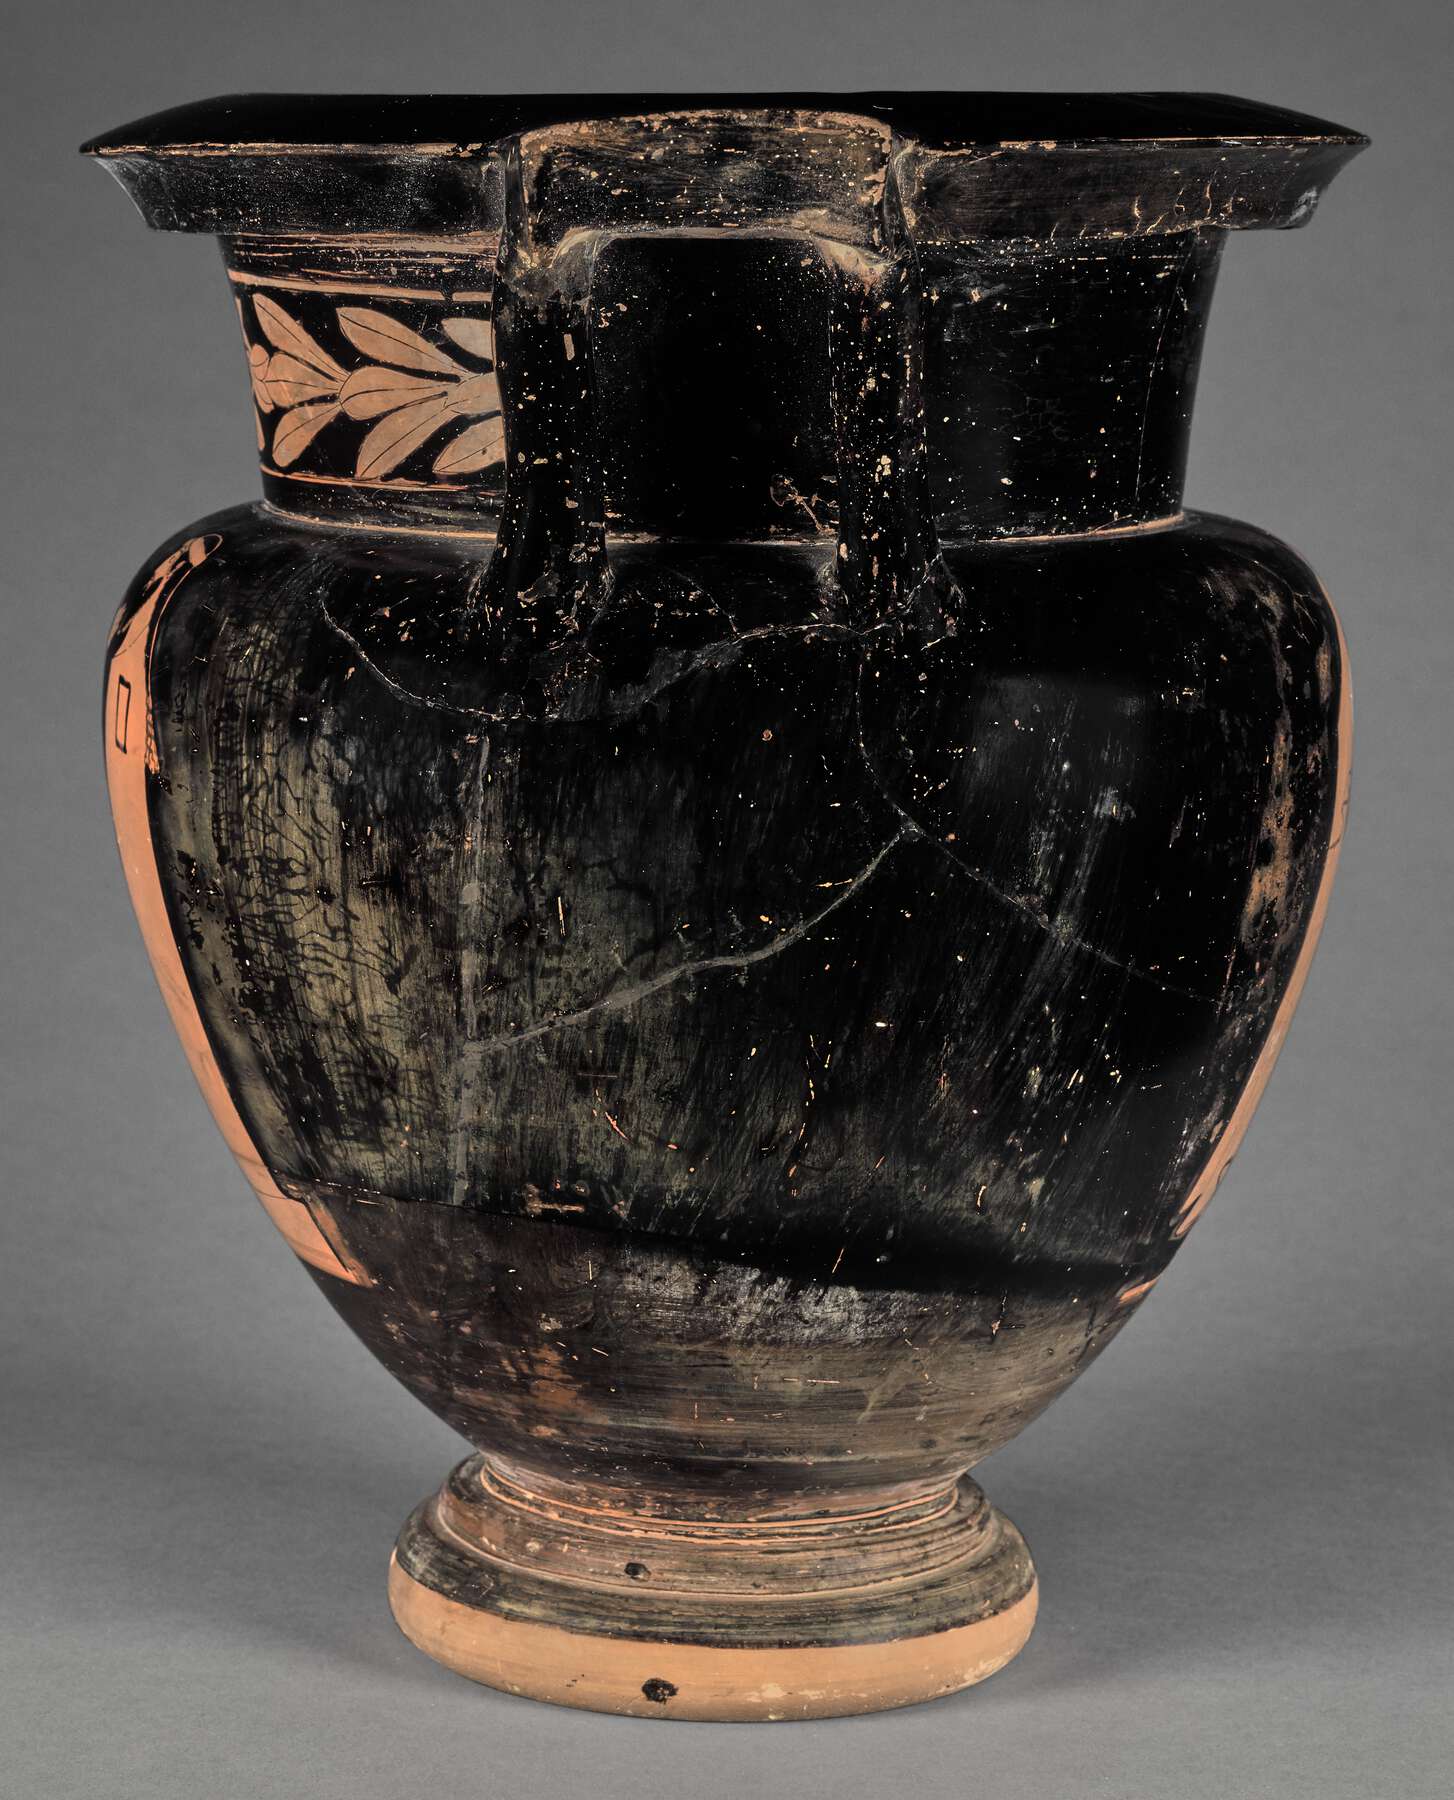 Side view of the vase, with the leaves on the left